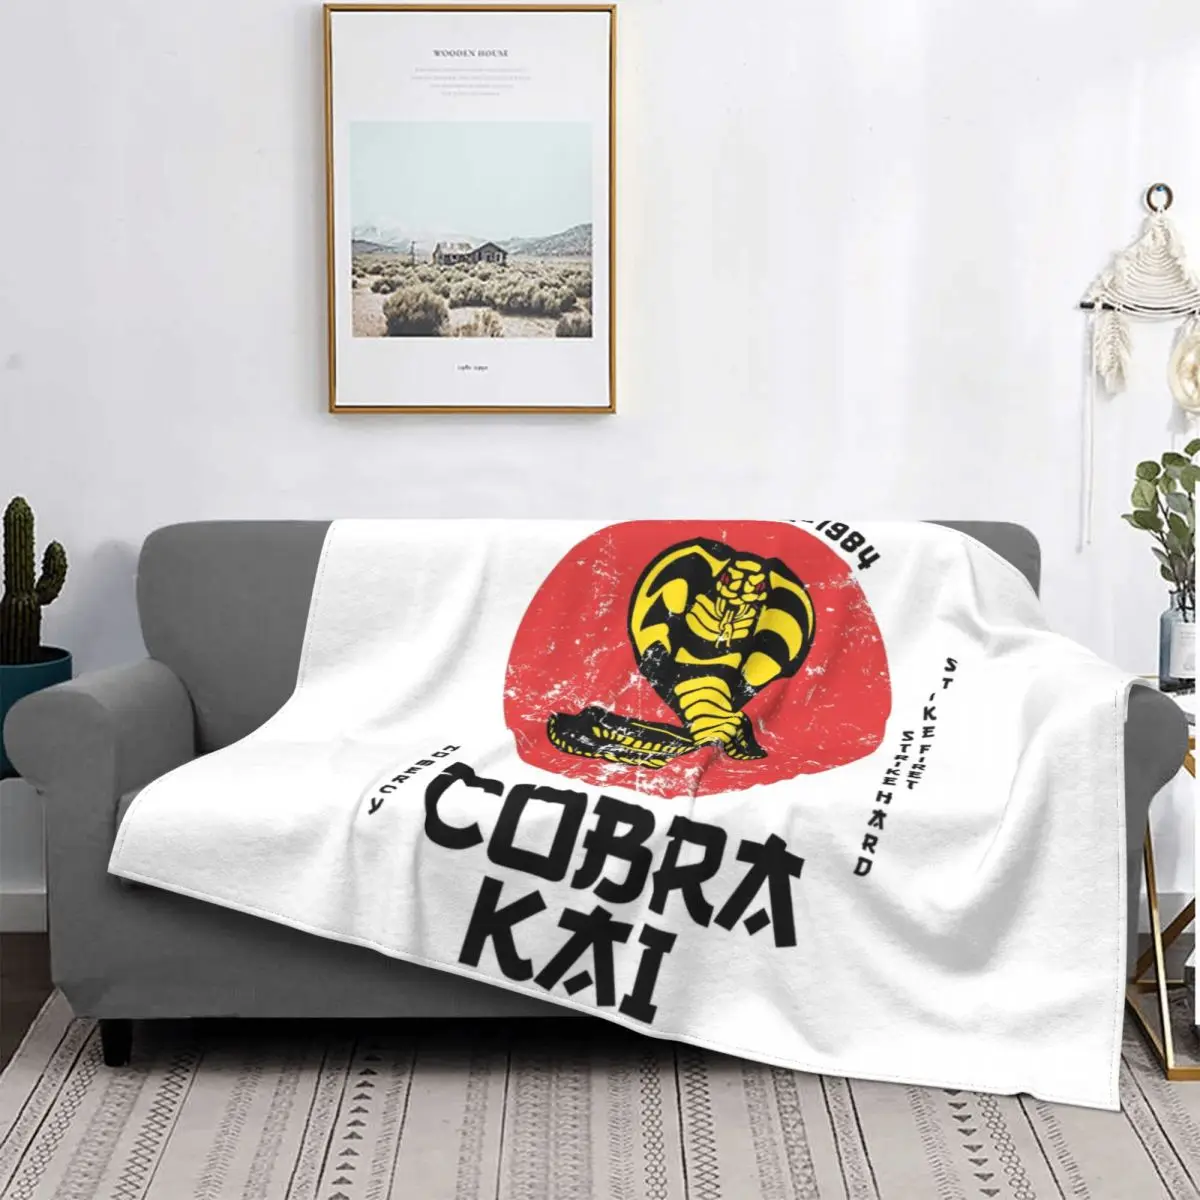 

Retro Cobra Kai Blanket 3D Printed Soft Flannel Fleece Warm The Karate Kid Throw Blankets for Sofa Travel Bed Couch Bedspreads